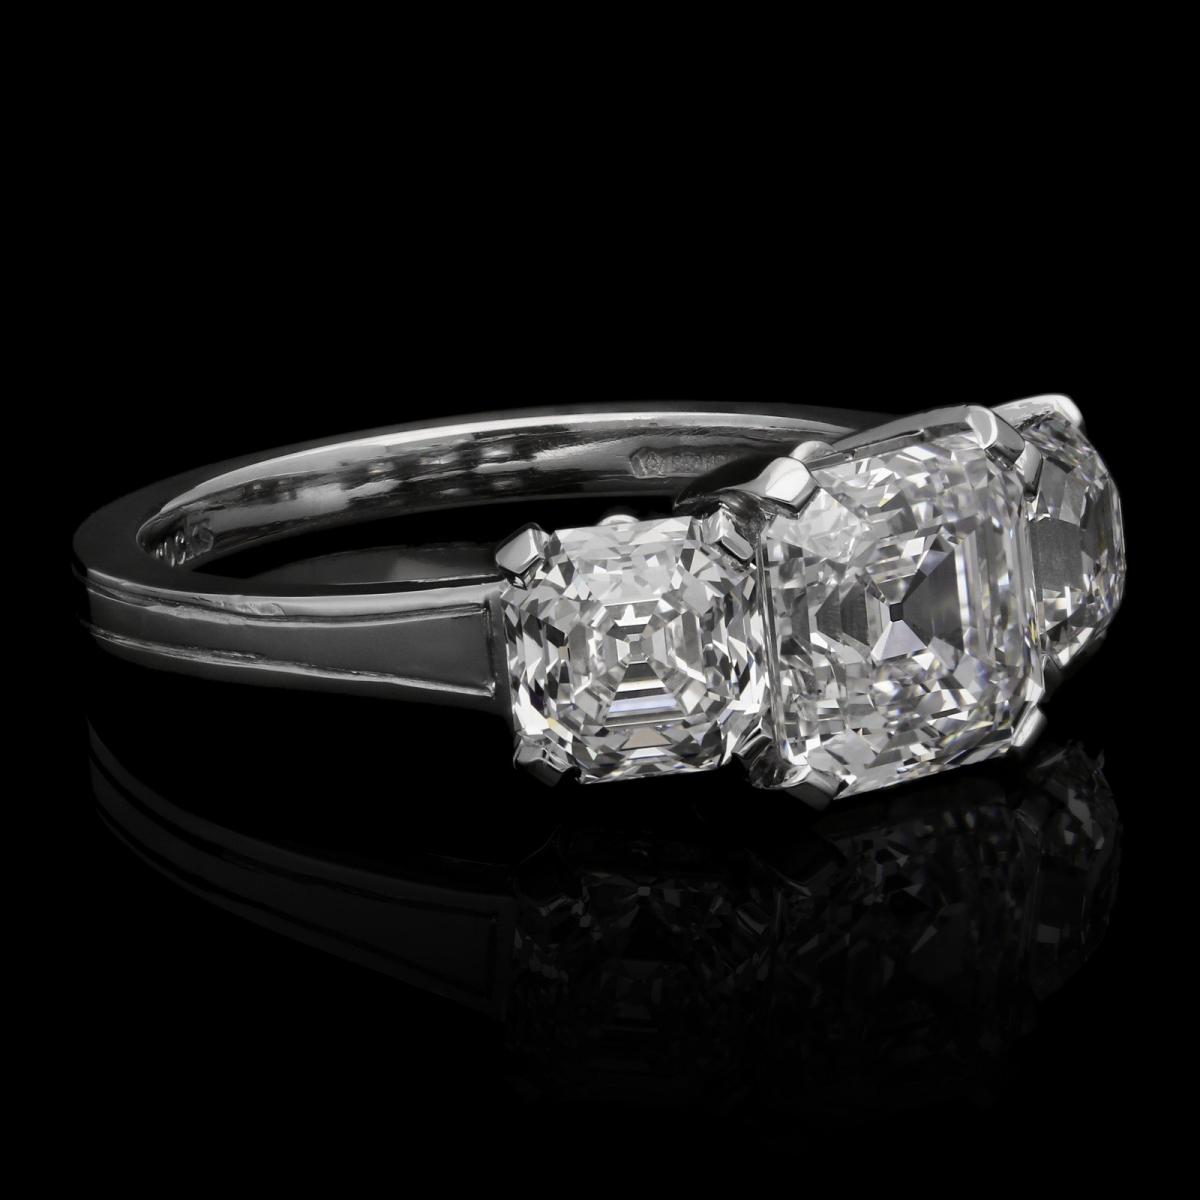 A beautiful three-stone Asscher cut diamond ring set in platinum with 3.80cts total